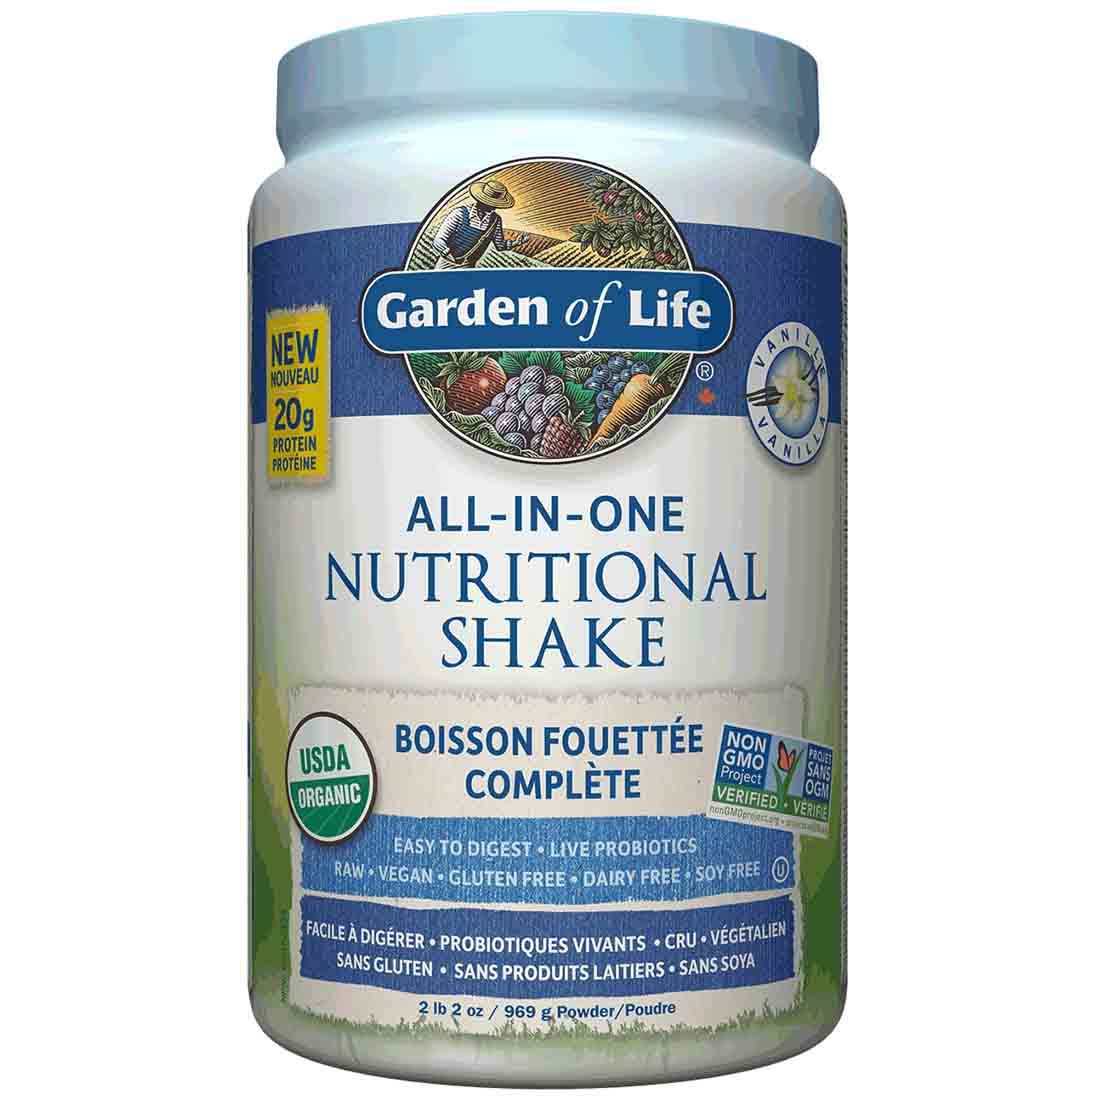 Garden Of Life All-in-One Nutritional Shake - Vanilla 969g